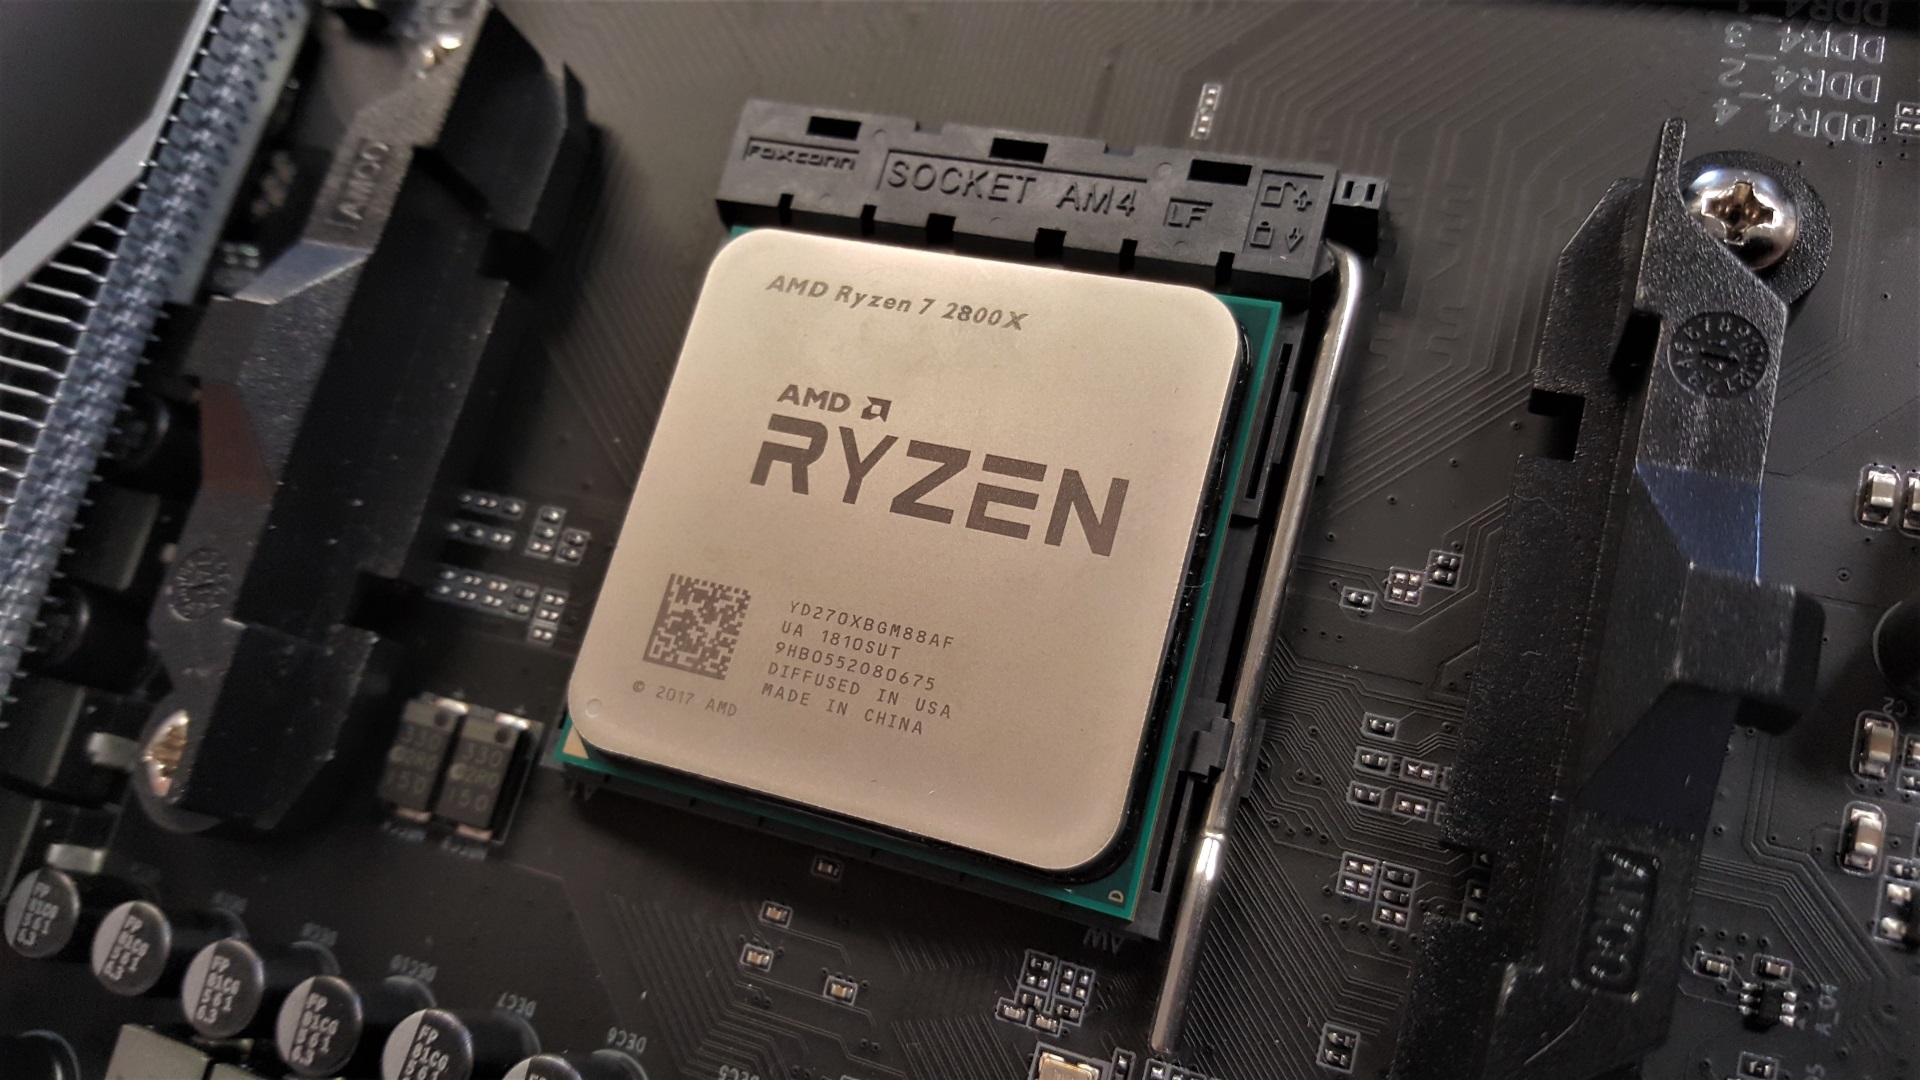 AMD is holding back the Ryzen 7 2800X for the 8-core Intel Coffee Lake